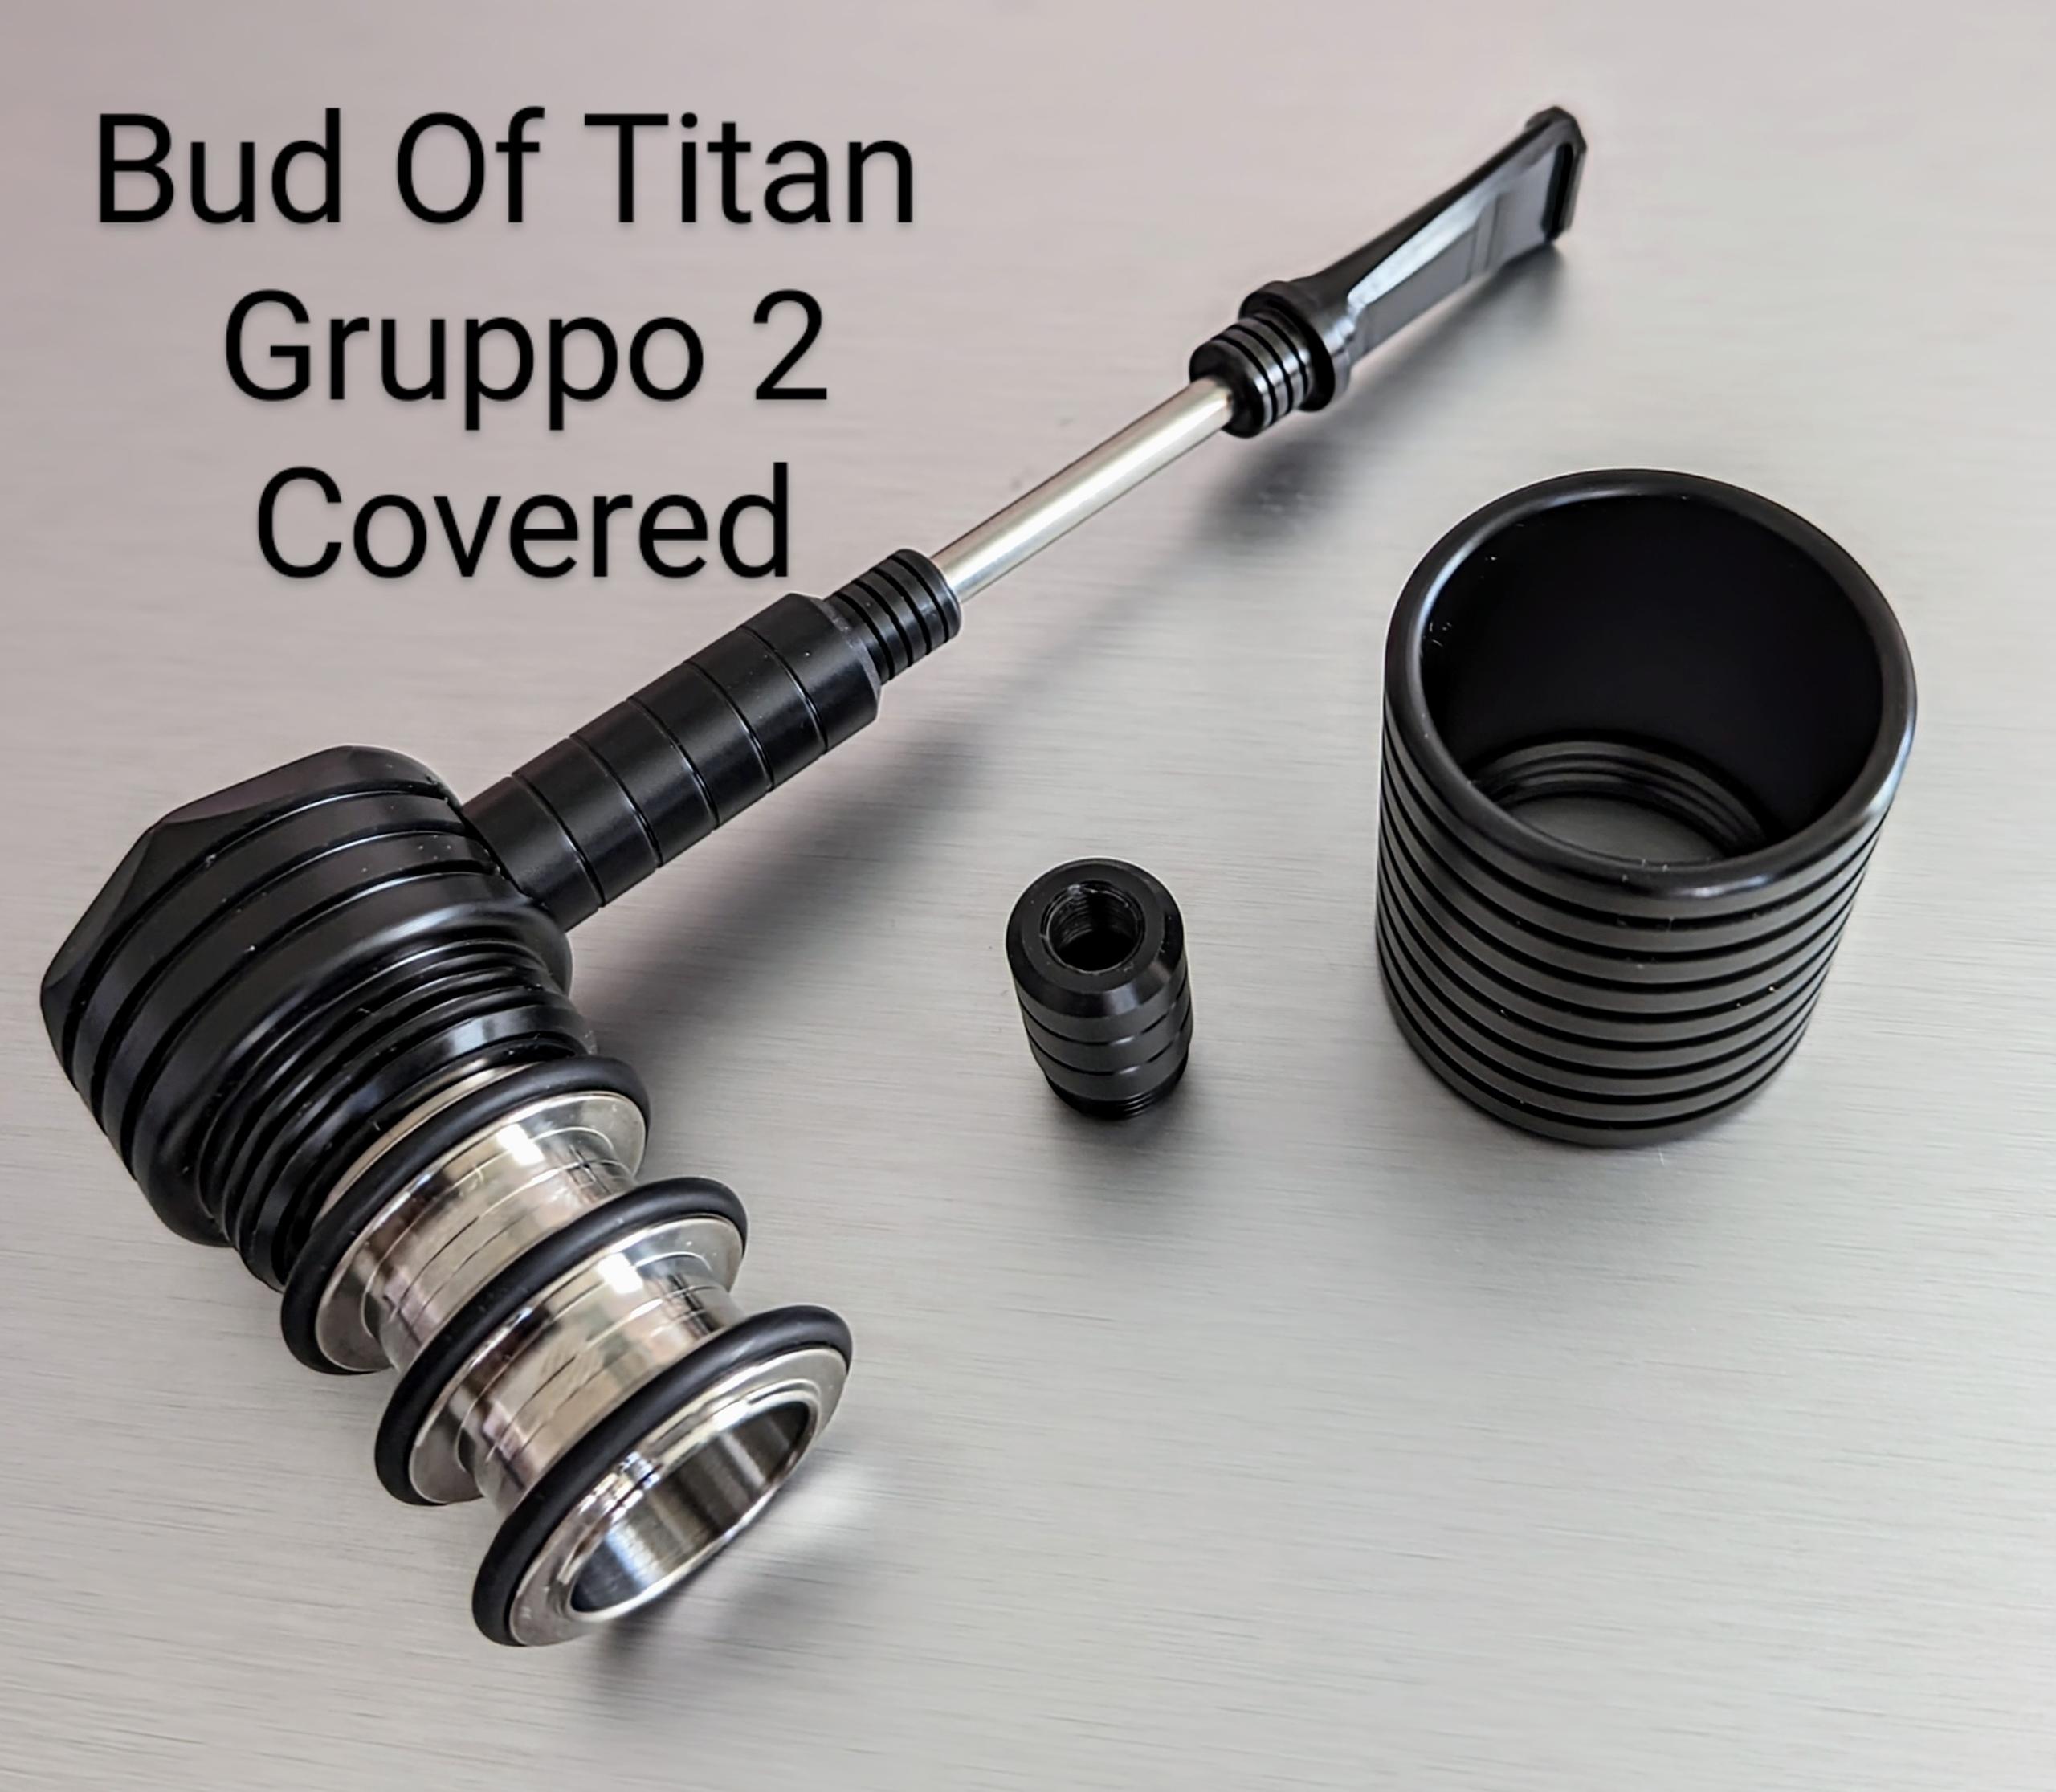 Job Pipe Bud Of TITAN Black Delrin Base and Cover Filter 9 mm Gruppo 2